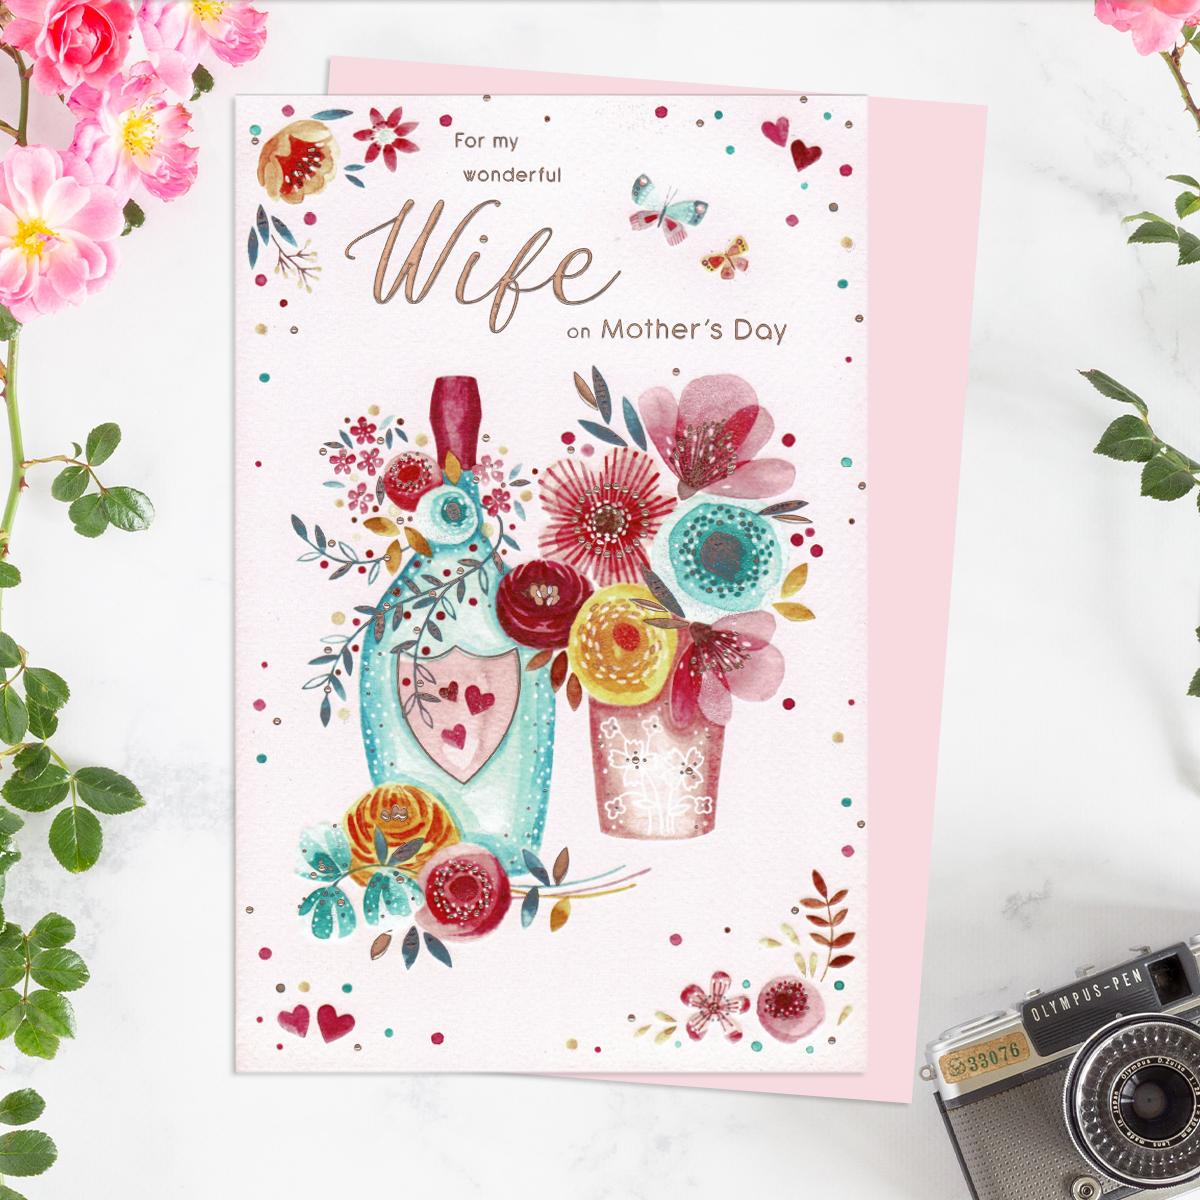 ' For My Wonderful Wife On Mother's Day' Card With Vibrant Flowers And Stunning Rose Gold Foiling Detail. Complete With Pink Envelope